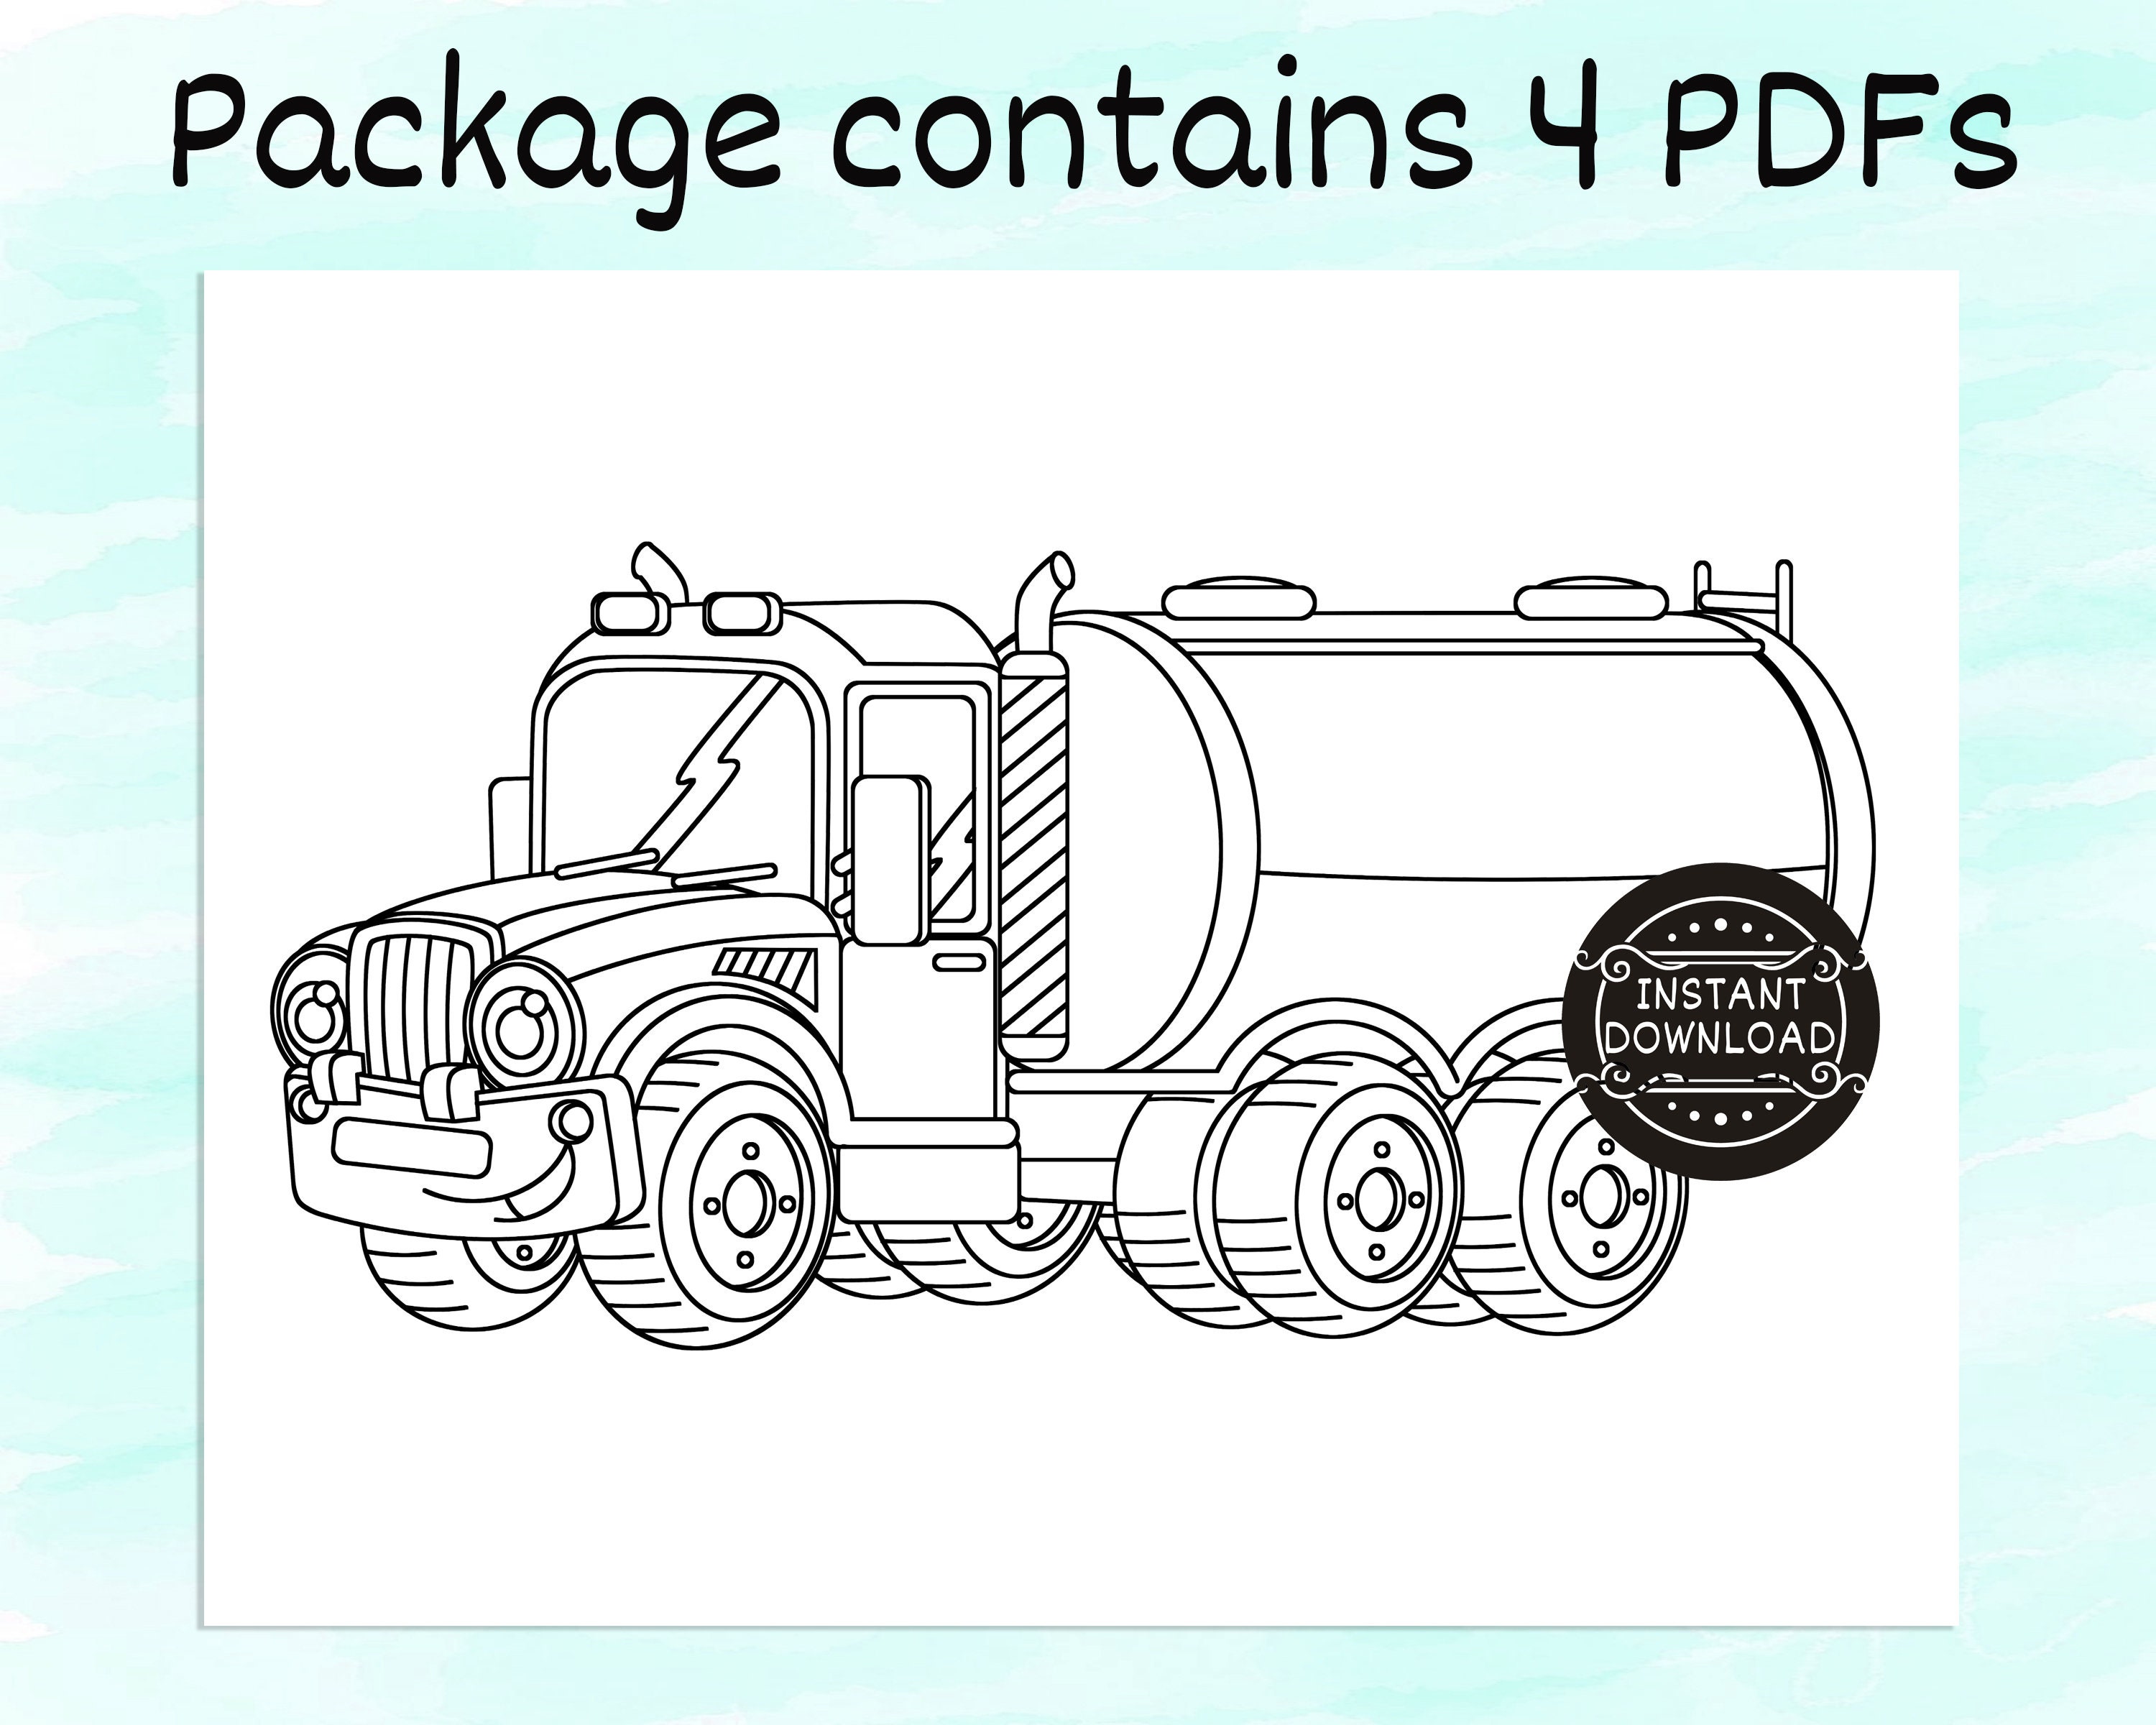 Truck coloring pages for kids printable coloring pages trucks for coloring coloring for pages for kids to print pdf set download now